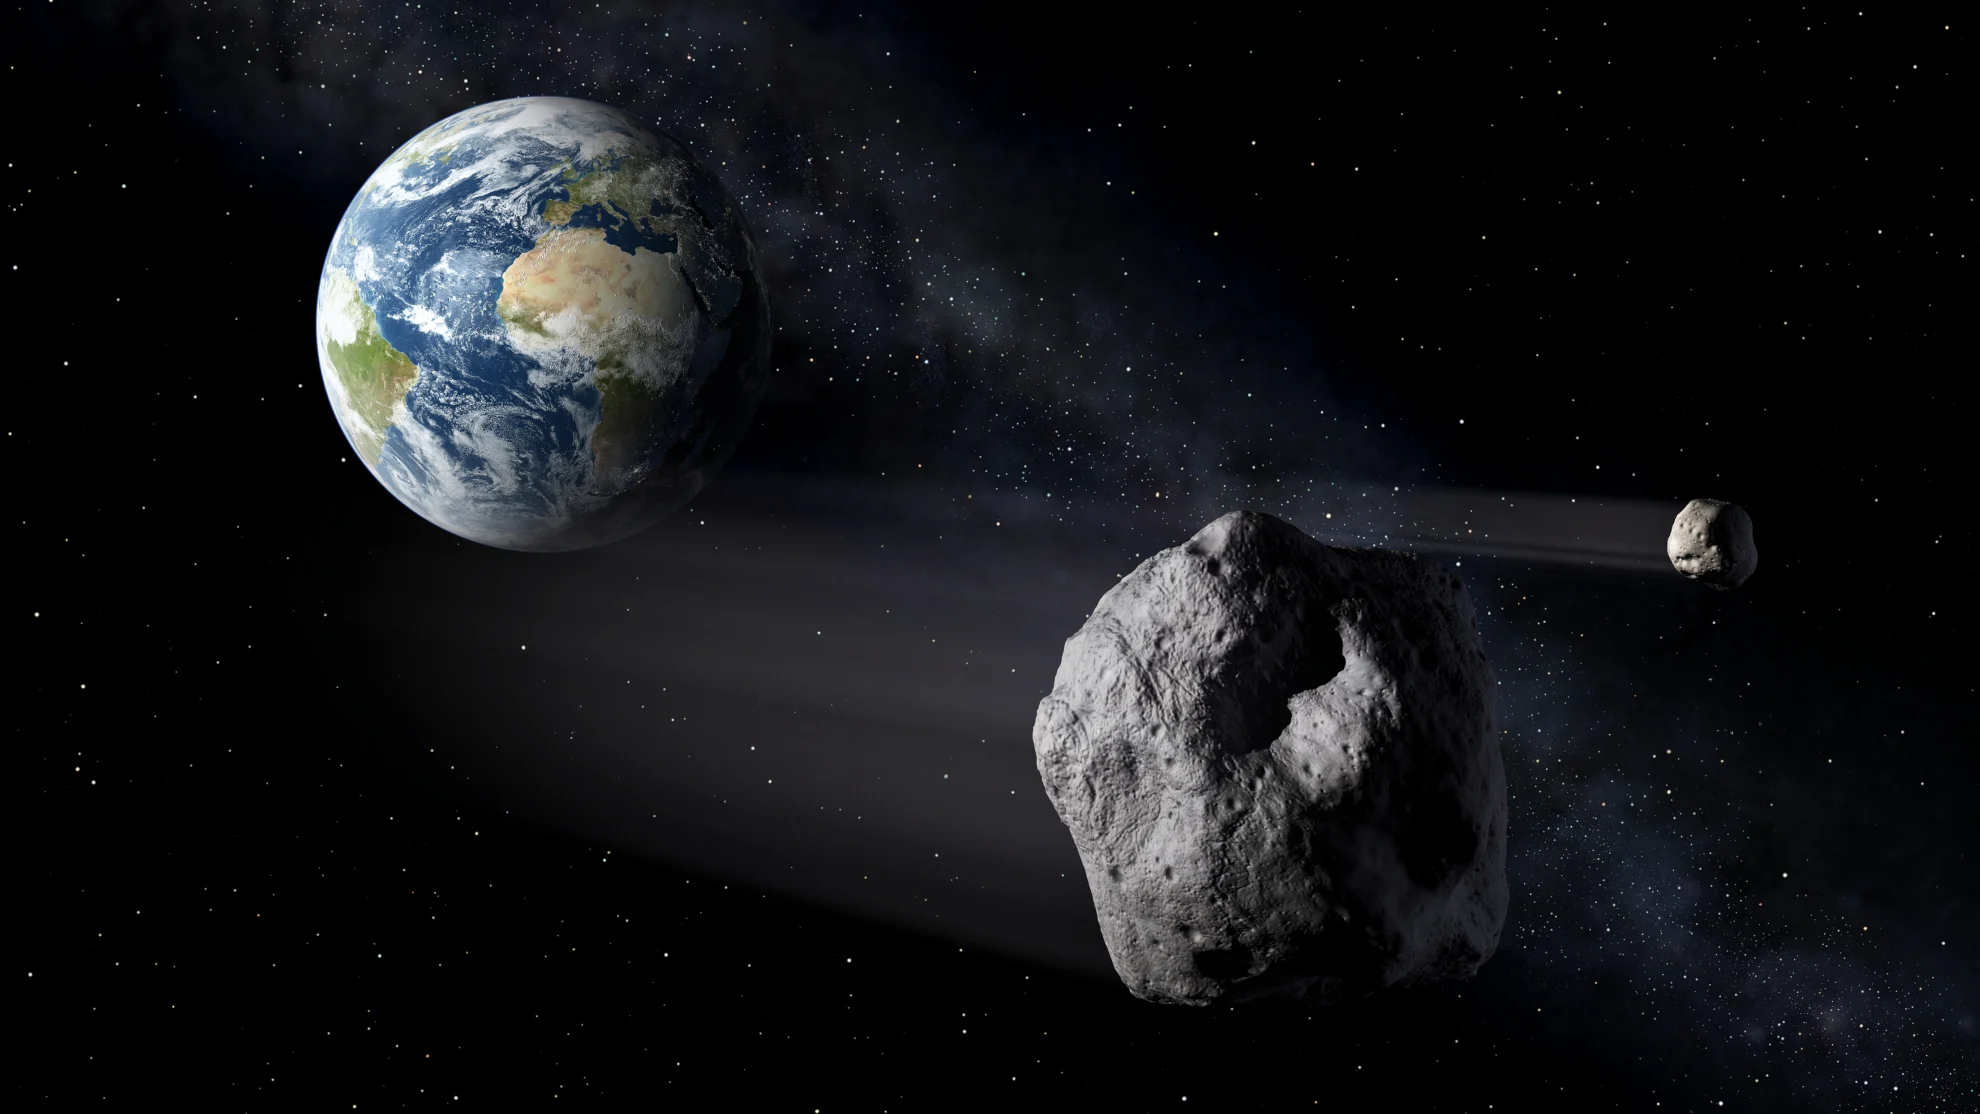 Two massive asteroids swing past Earth this week, but don't worry! We're safe!